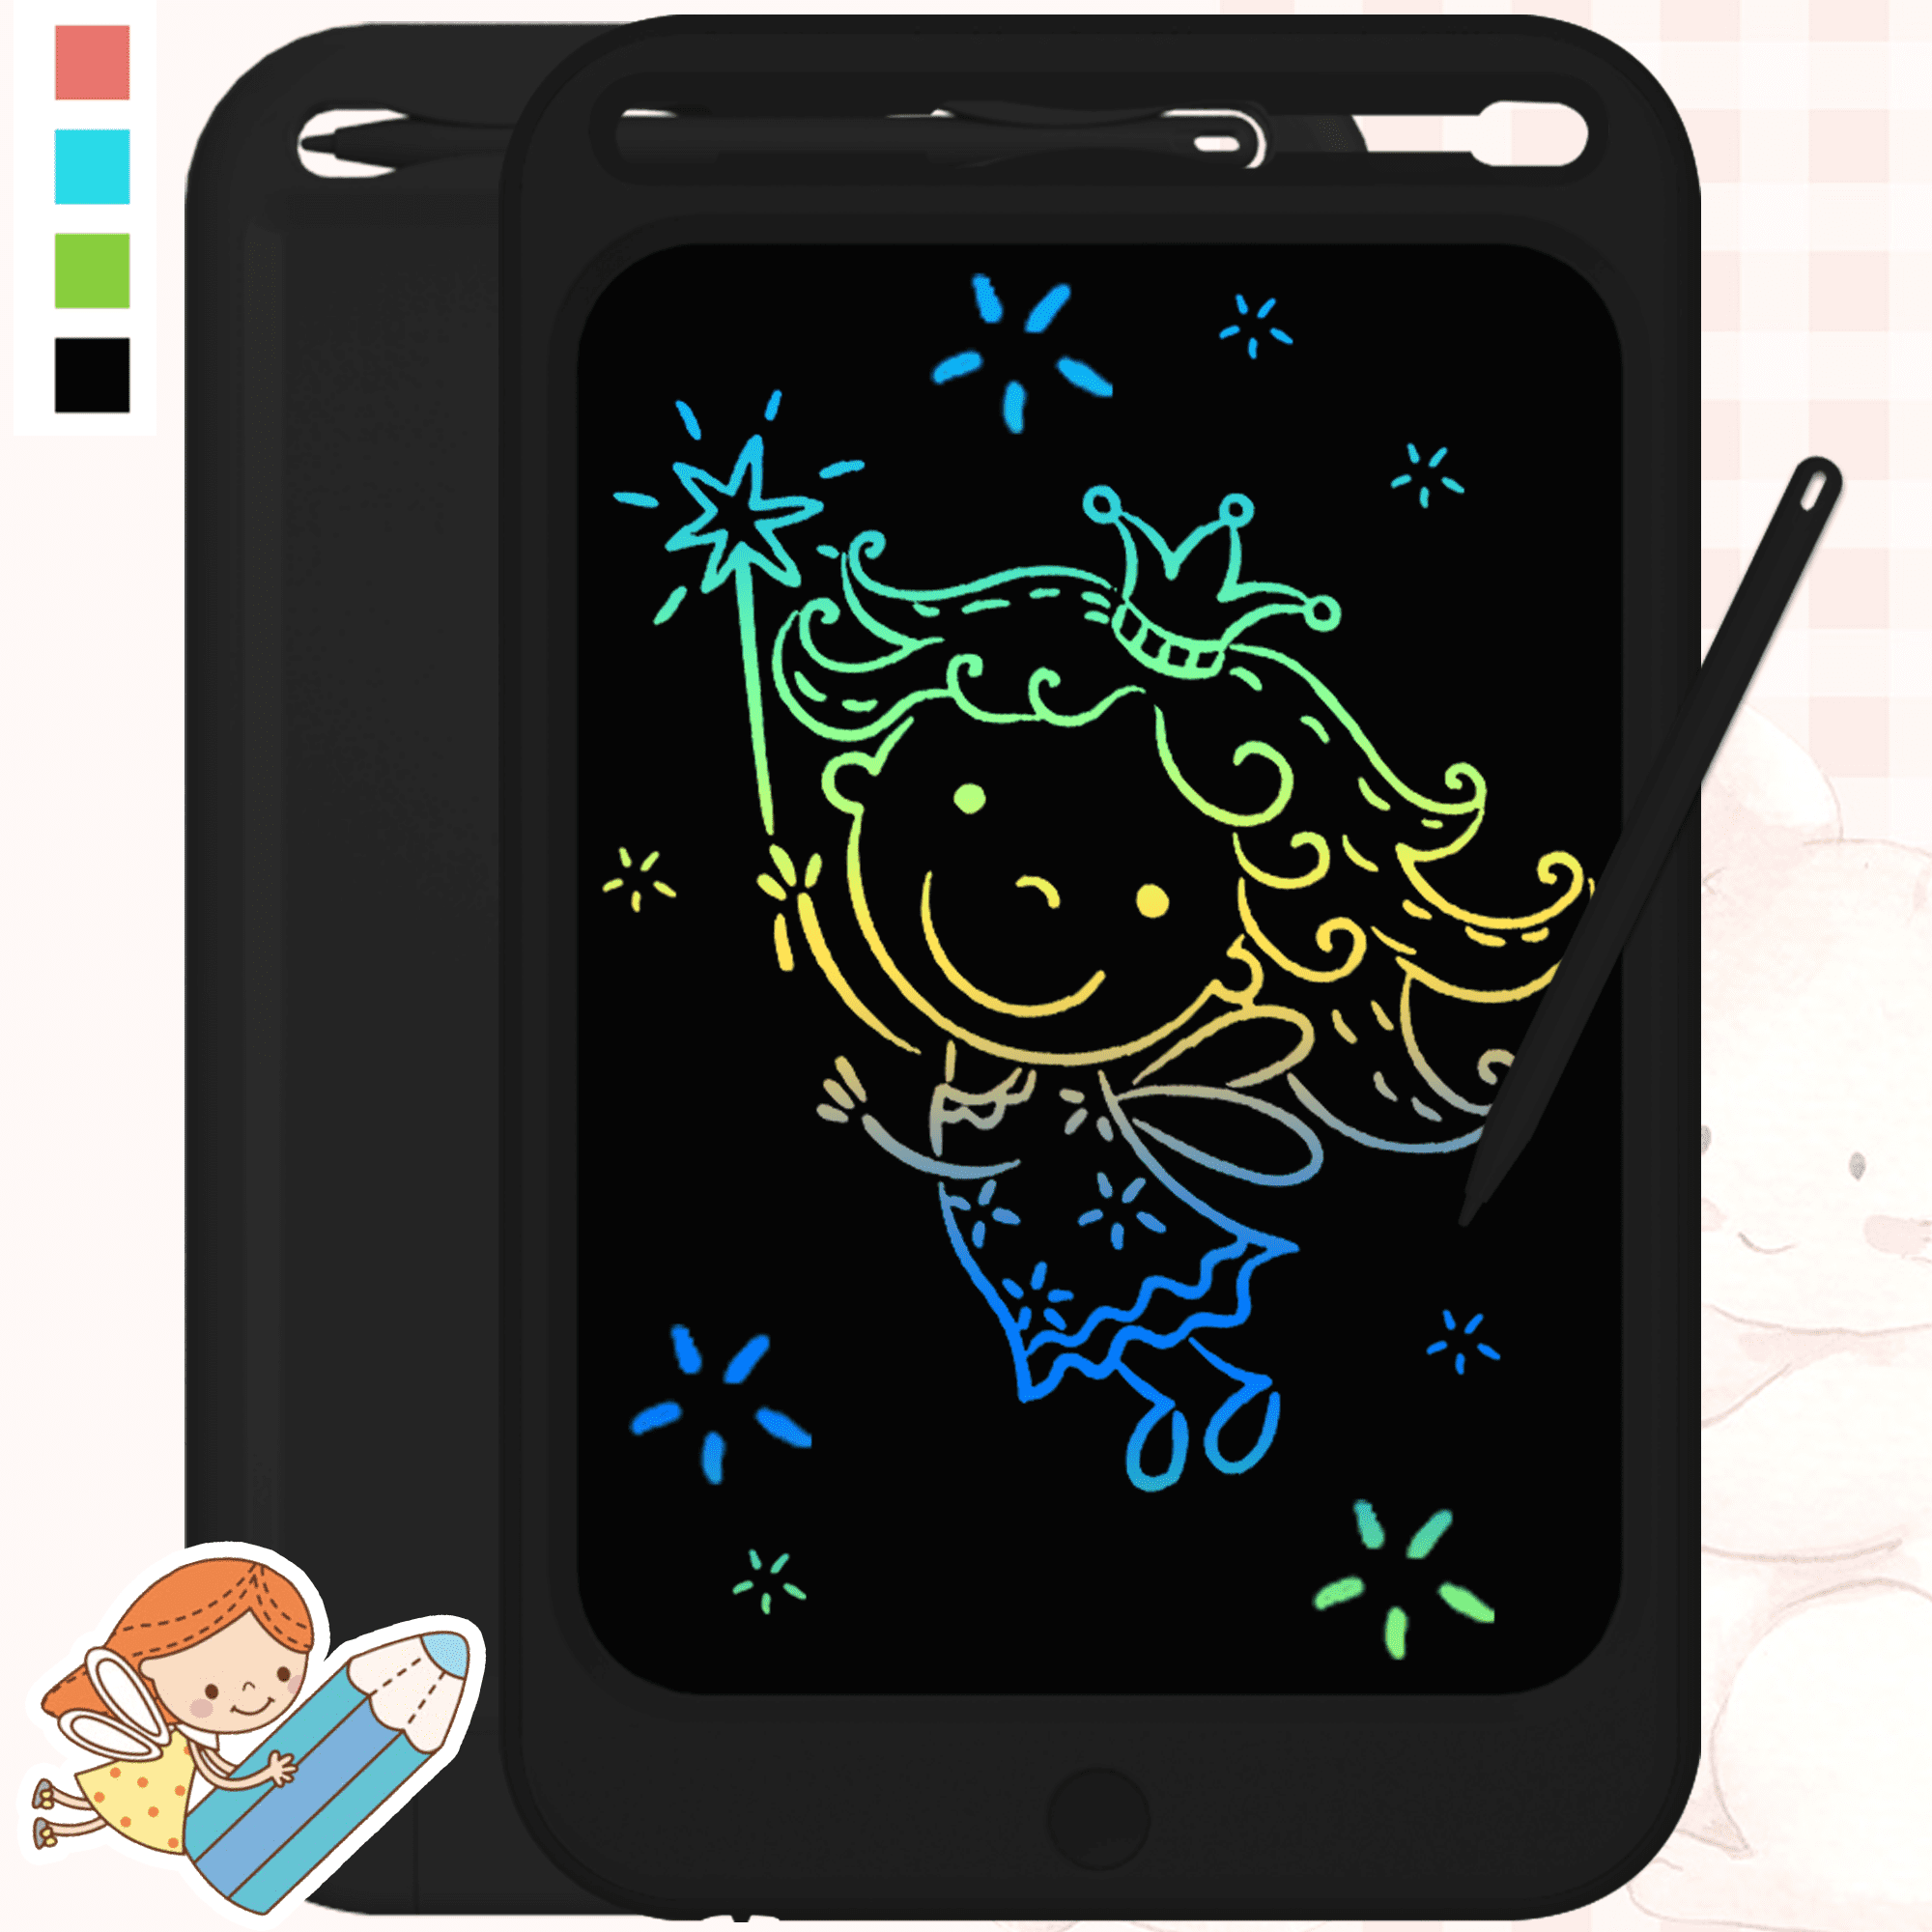 Hot Sale- SAVE 48% OFF) Magic LCD Drawing Tablet – Fab Gifts